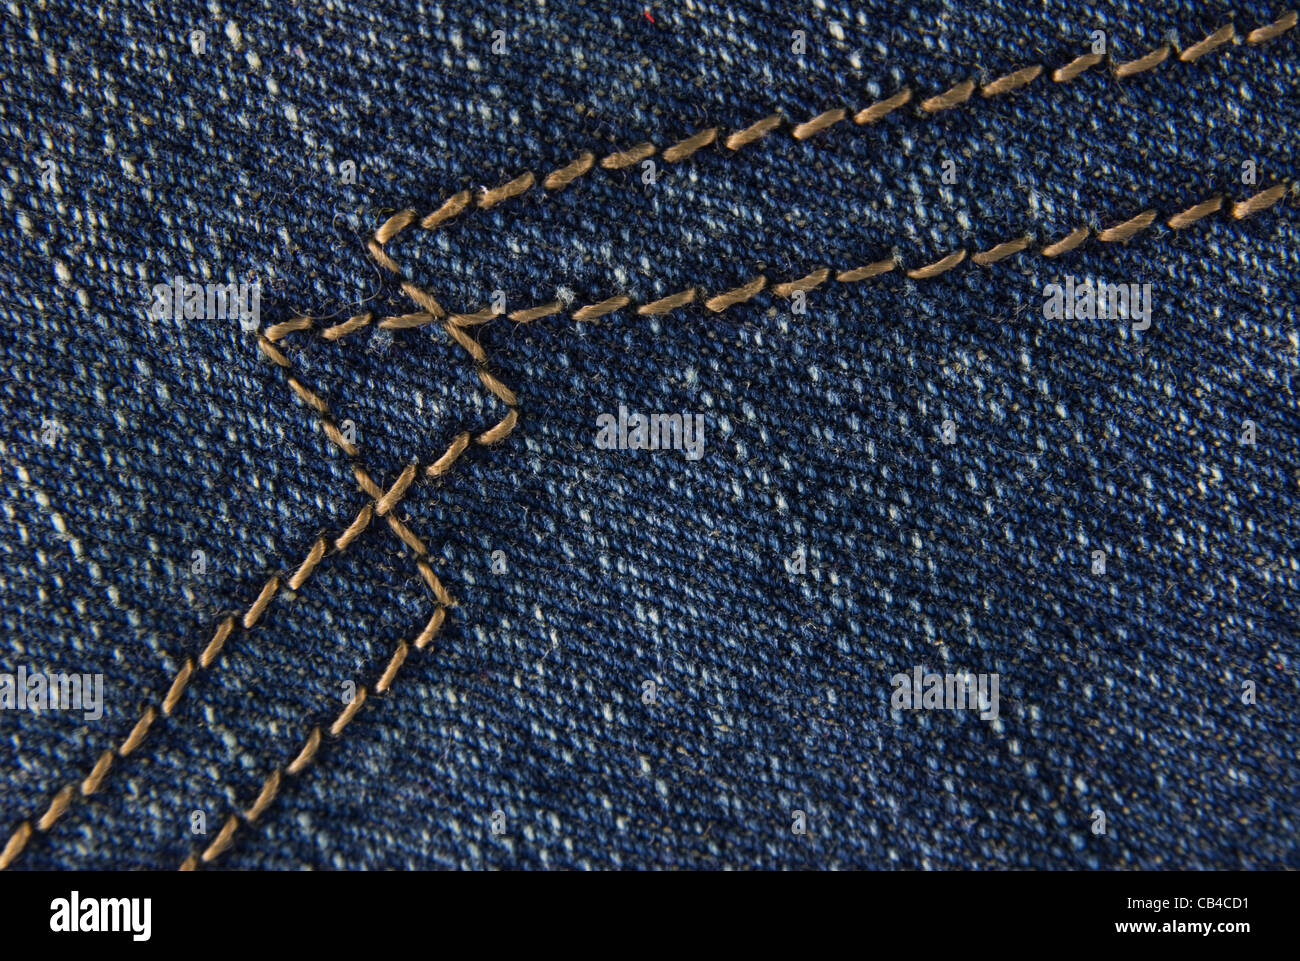 Blue denim jeans texture macro close up. Useful as background for design works. Stock Photo